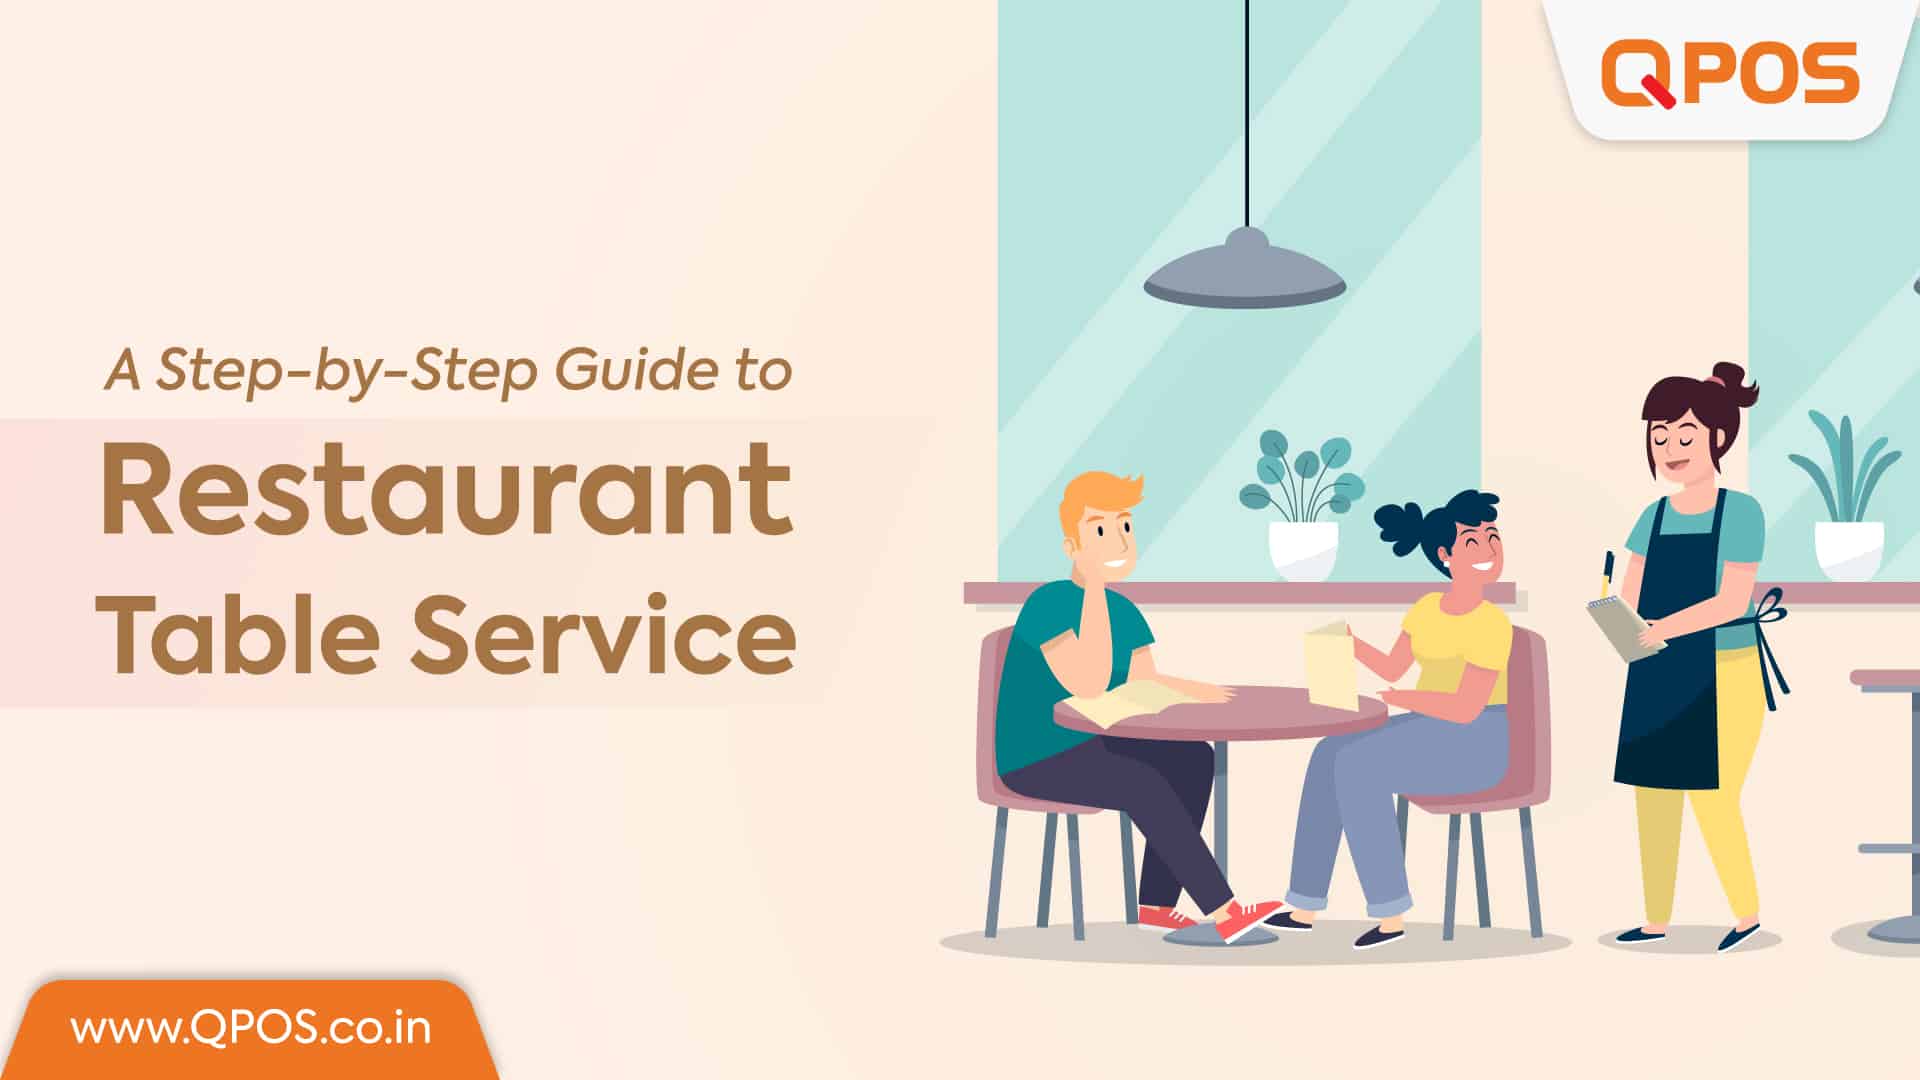 A Step-by-Step Guide to Restaurant Table Service